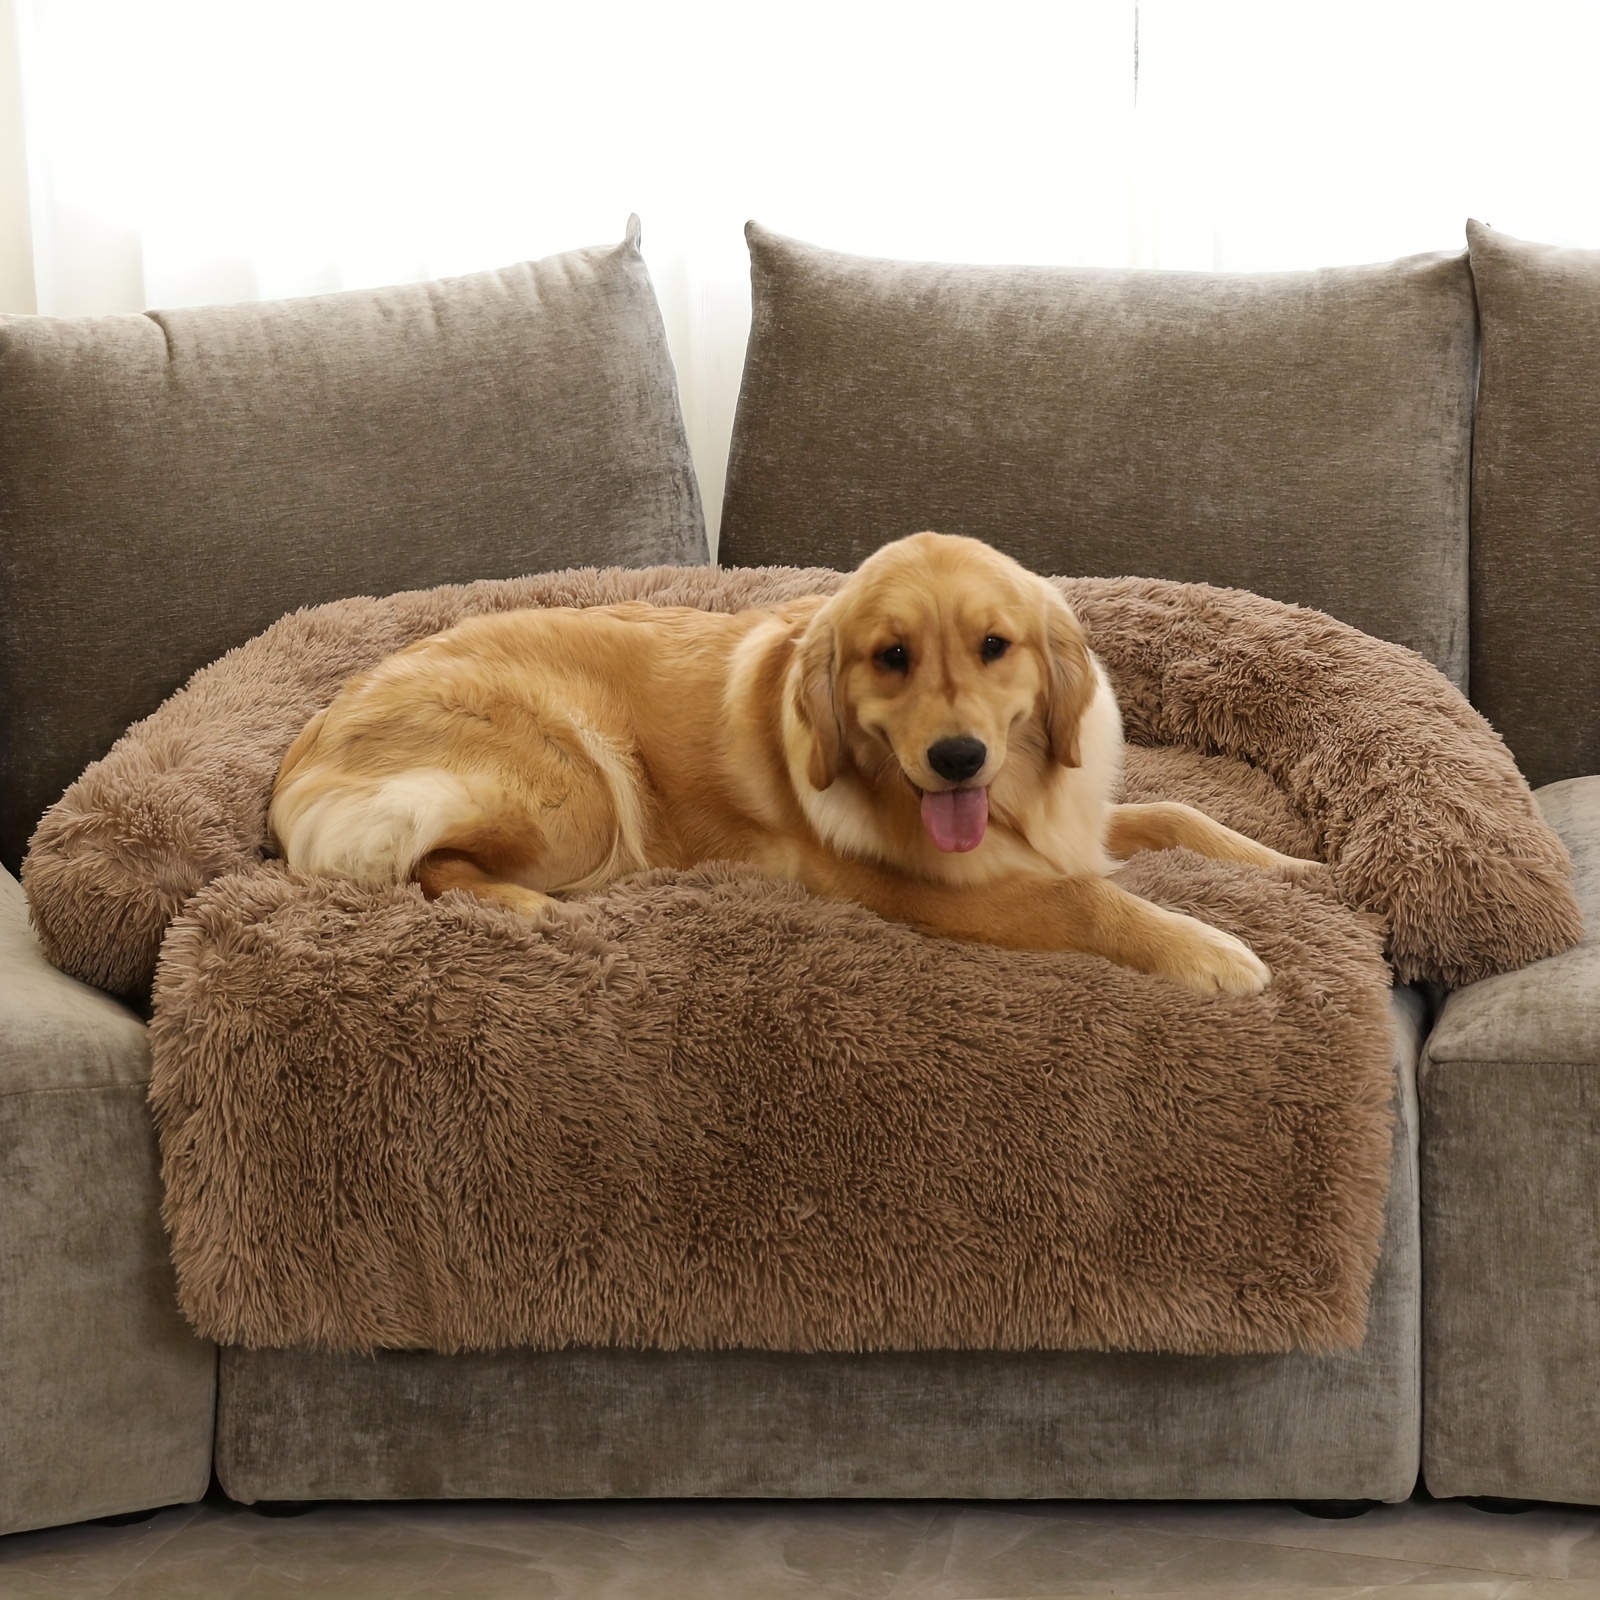 

Calming Dog Beds For Extra Large Dogs Fluffy Plush Couch Cover For Dogs With Removable Washable Cover For Furniture Protector (xl, Light Brown)